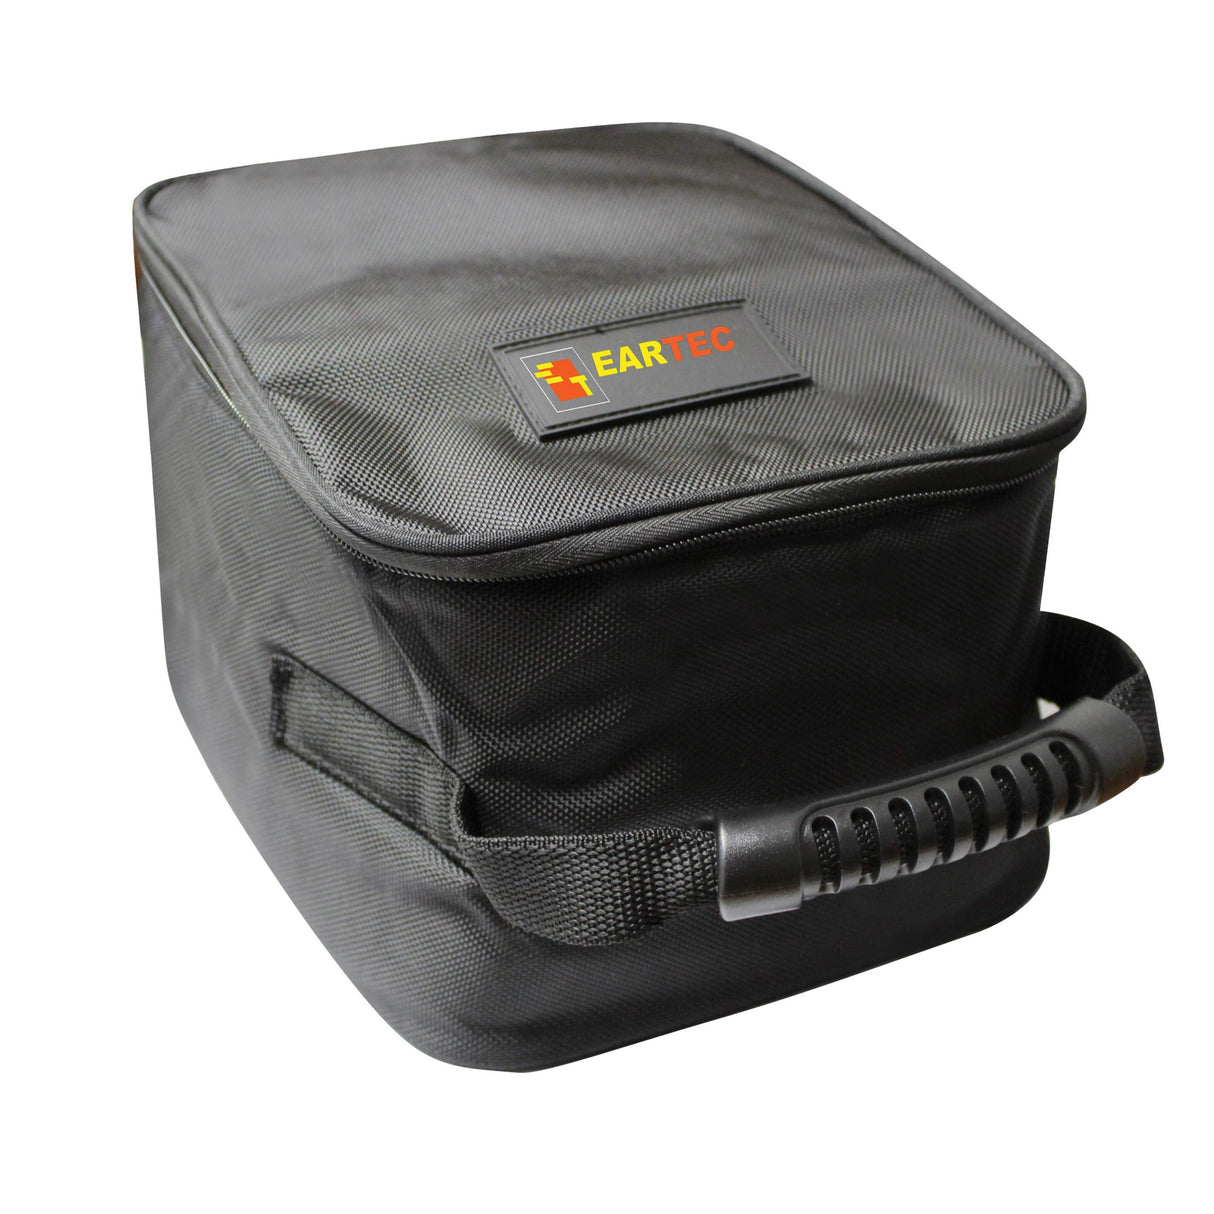 Eartec Small Softside Case - Padded Storage / Transport Case